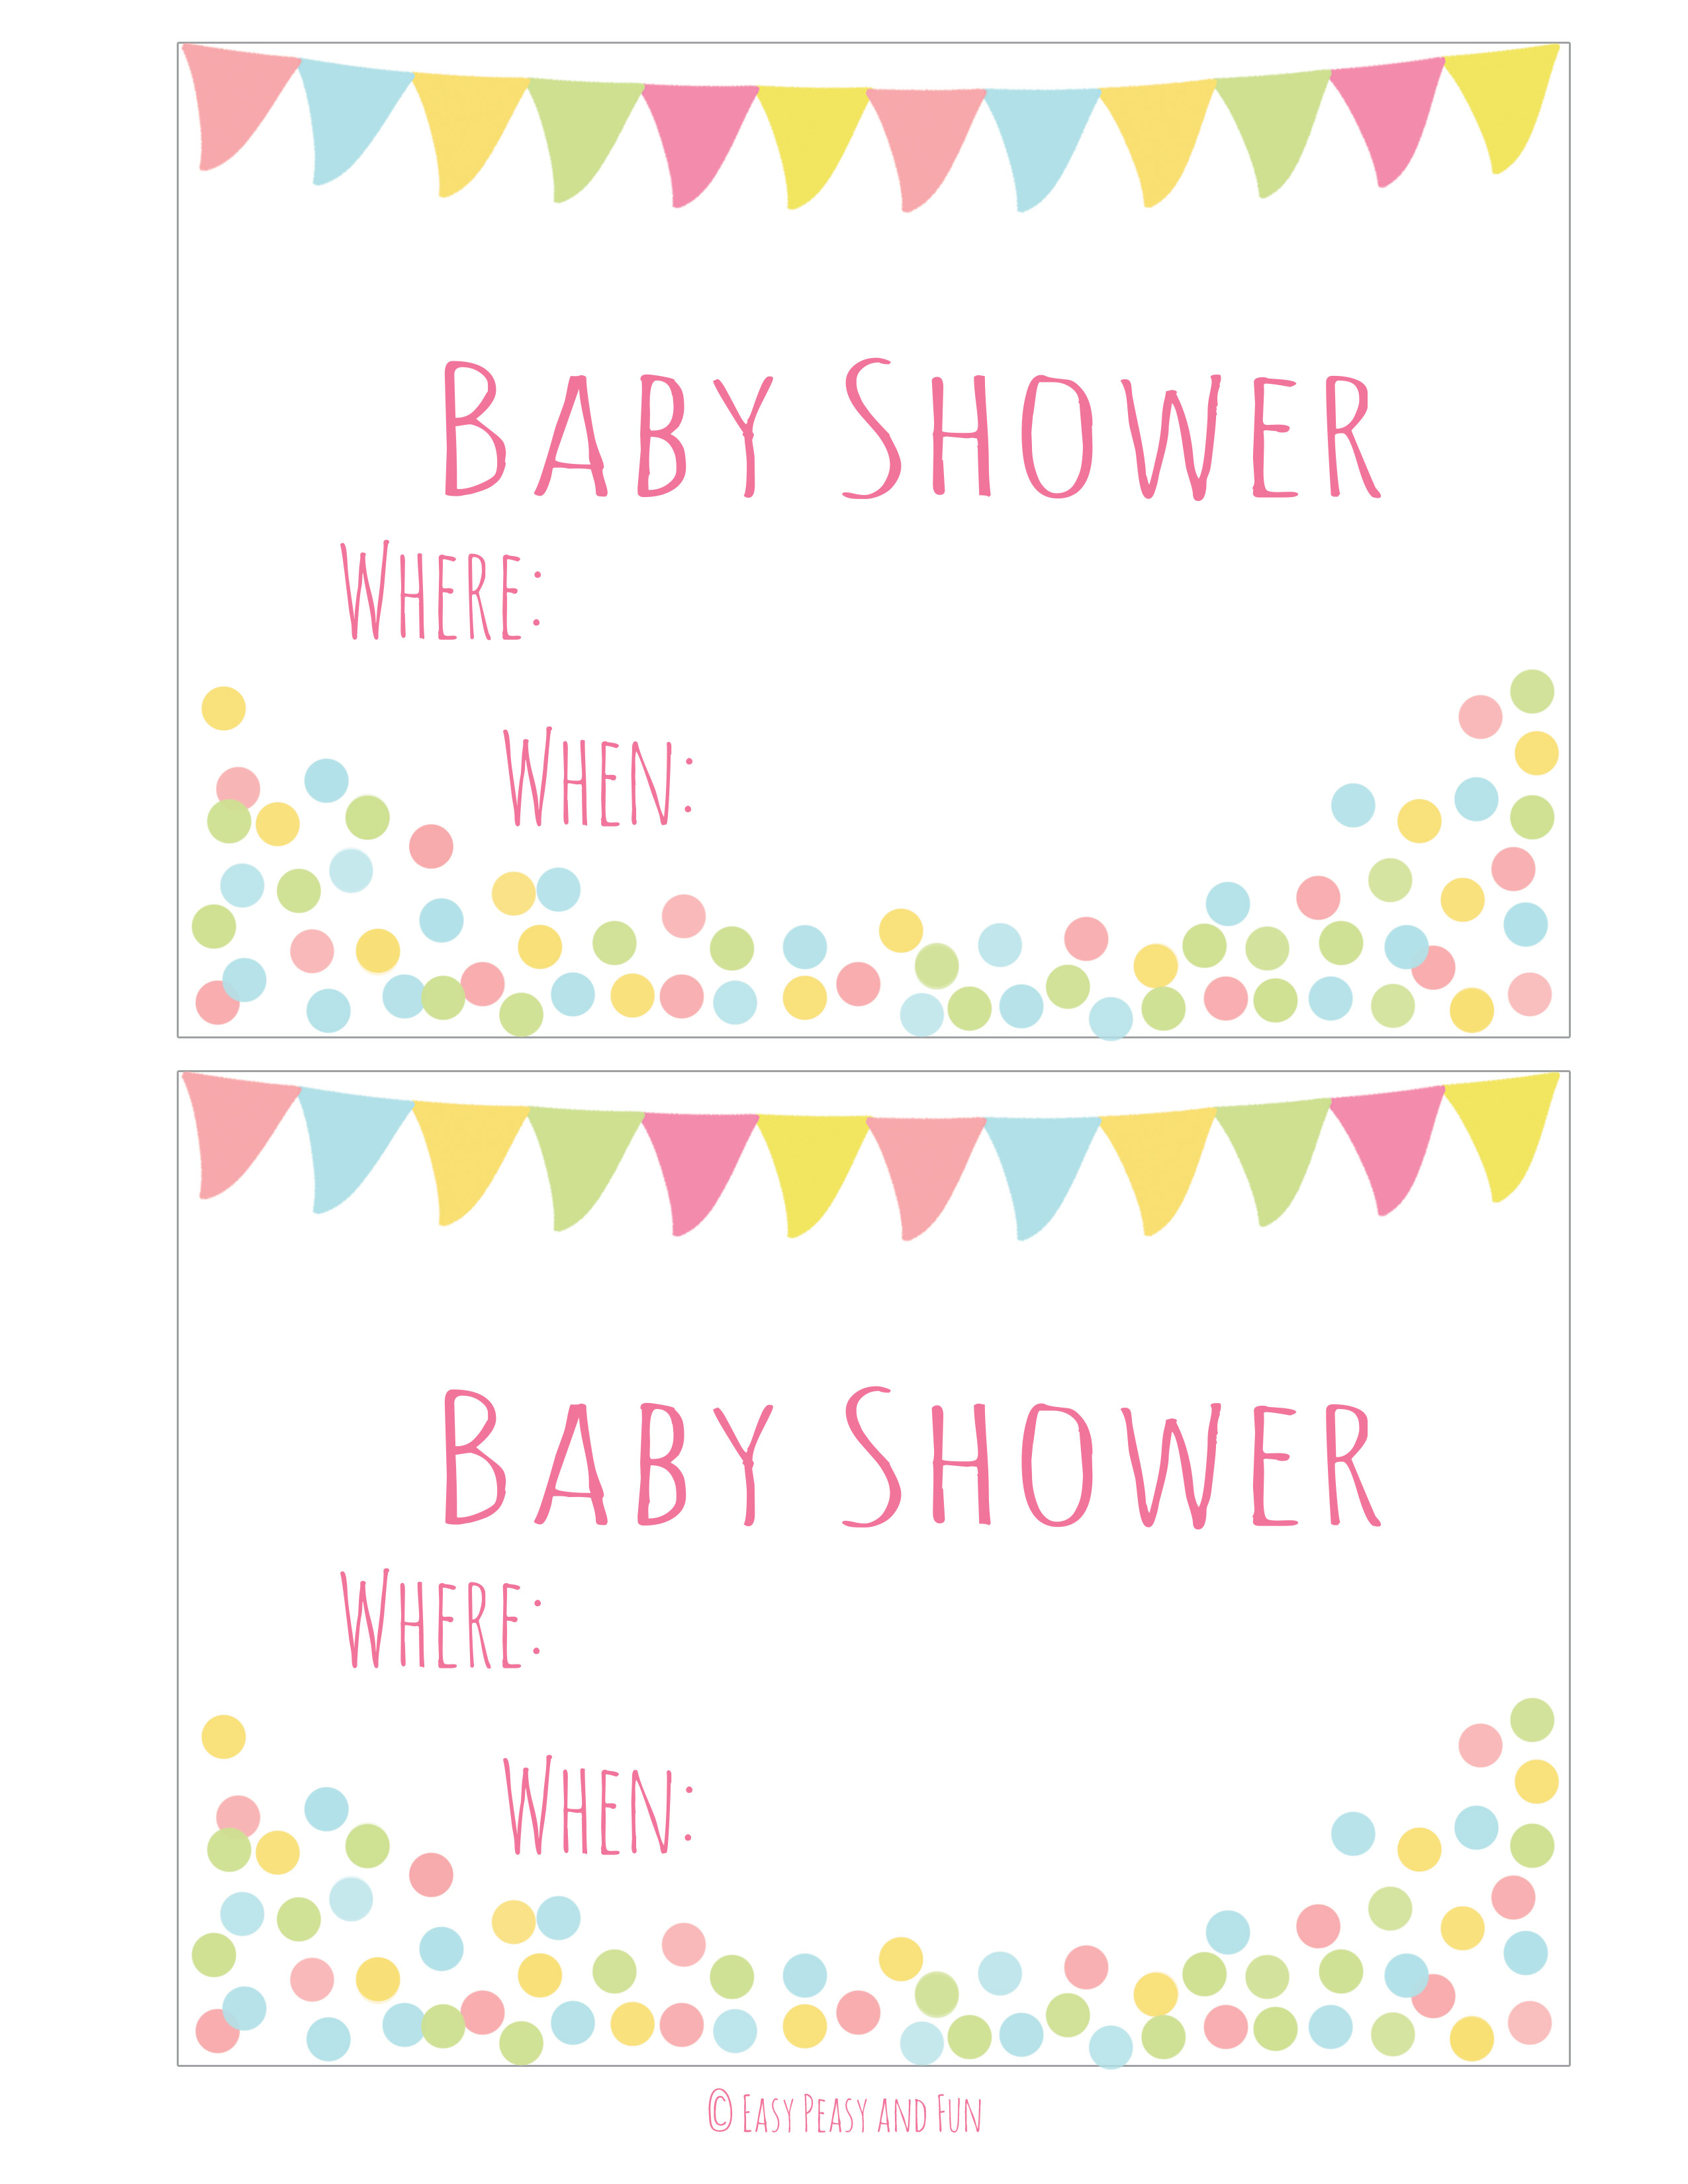 Full Size of Baby Shower:sturdy Baby Shower Invitation Template Image Concepts Baby Shower Favors To Make Princess Baby Shower Adornos De Baby Shower Baby Shower Gift List